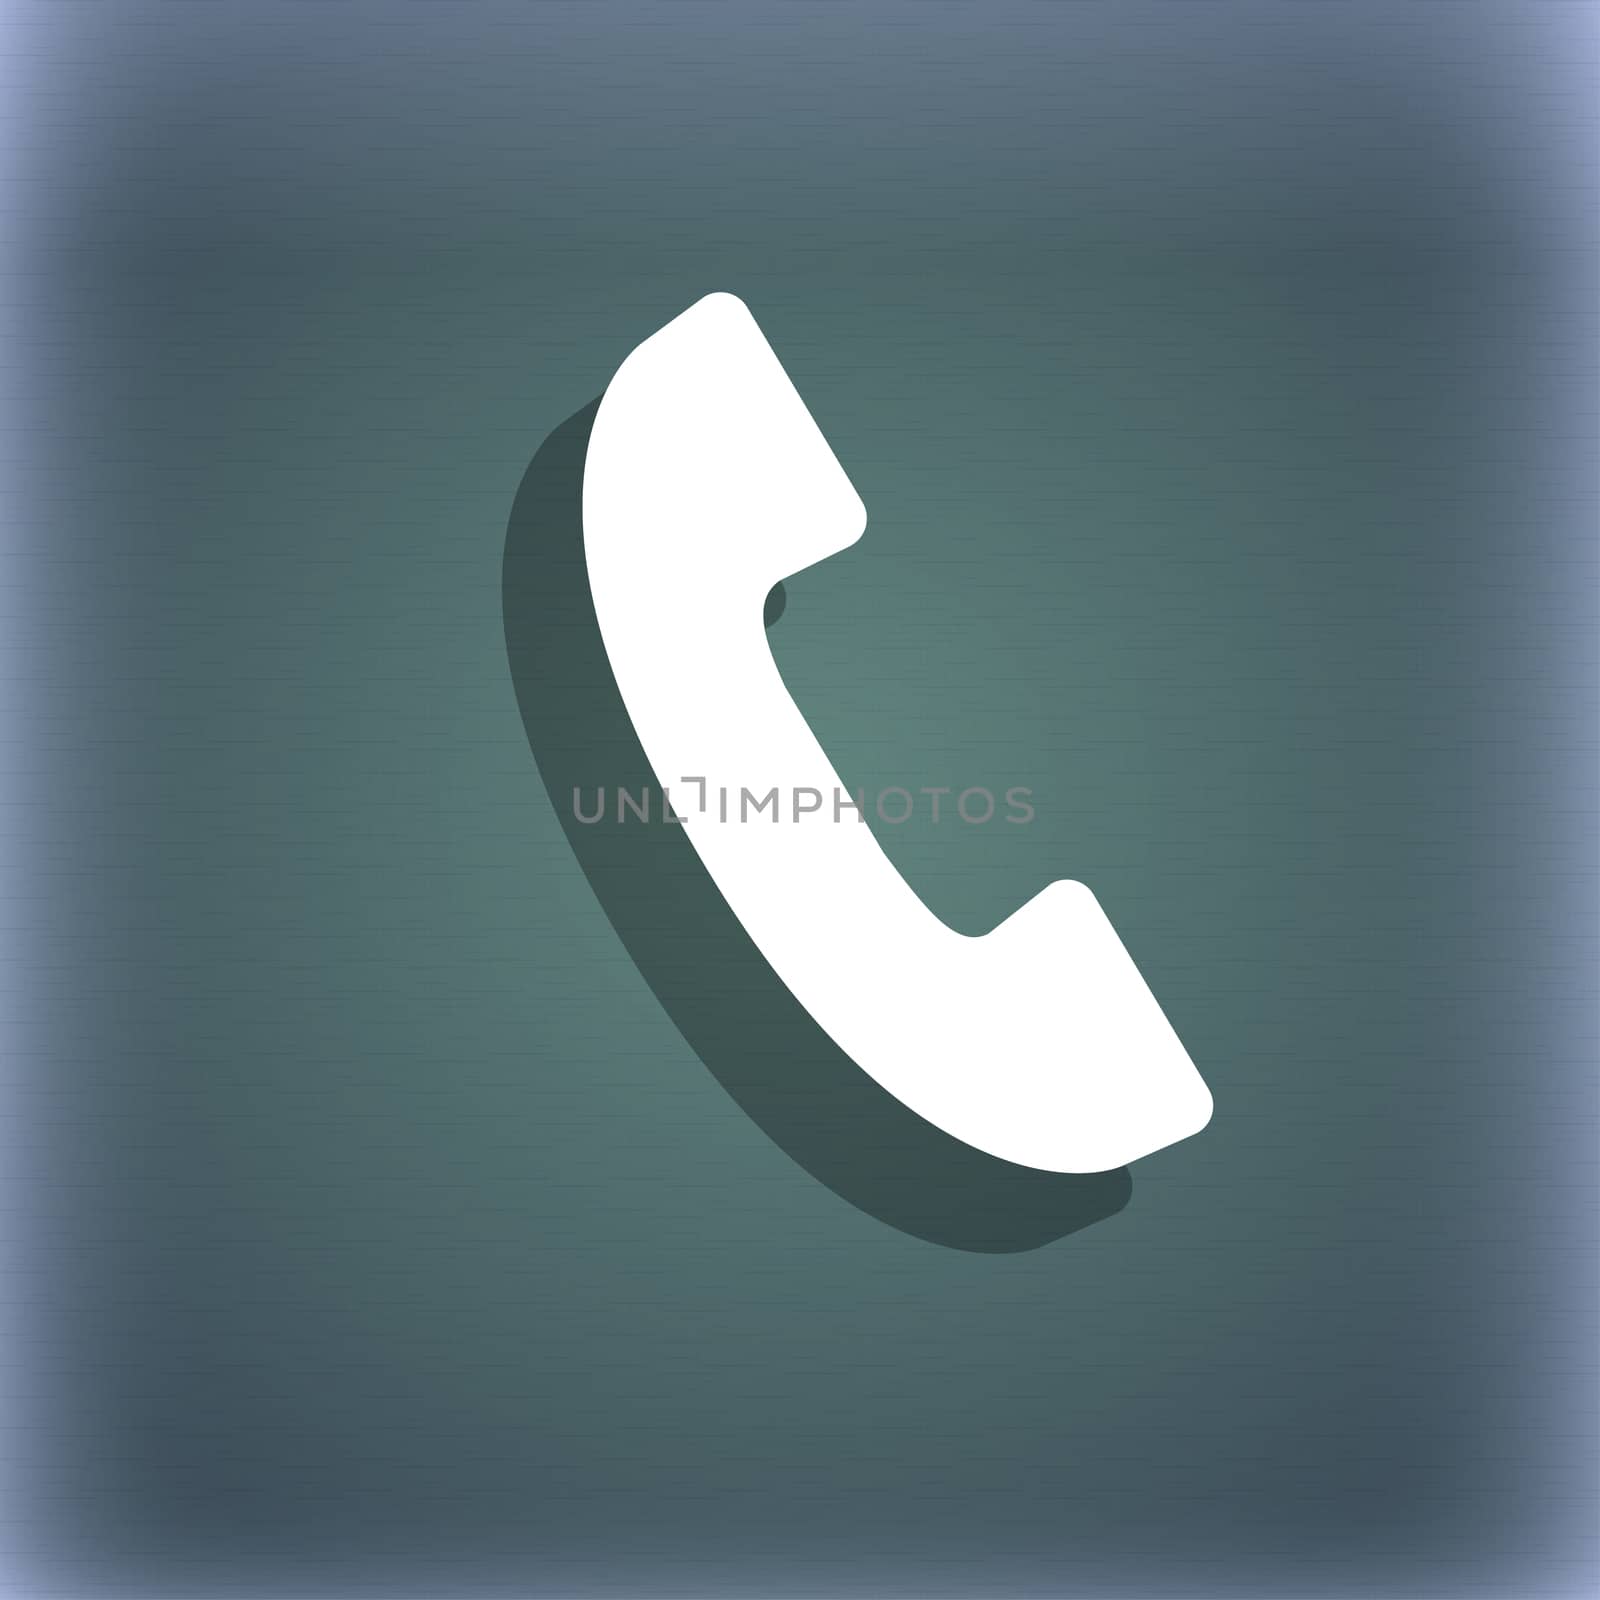 Phone sign icon. Support symbol. Call center. On the blue-green abstract background with shadow and space for your text. illustration